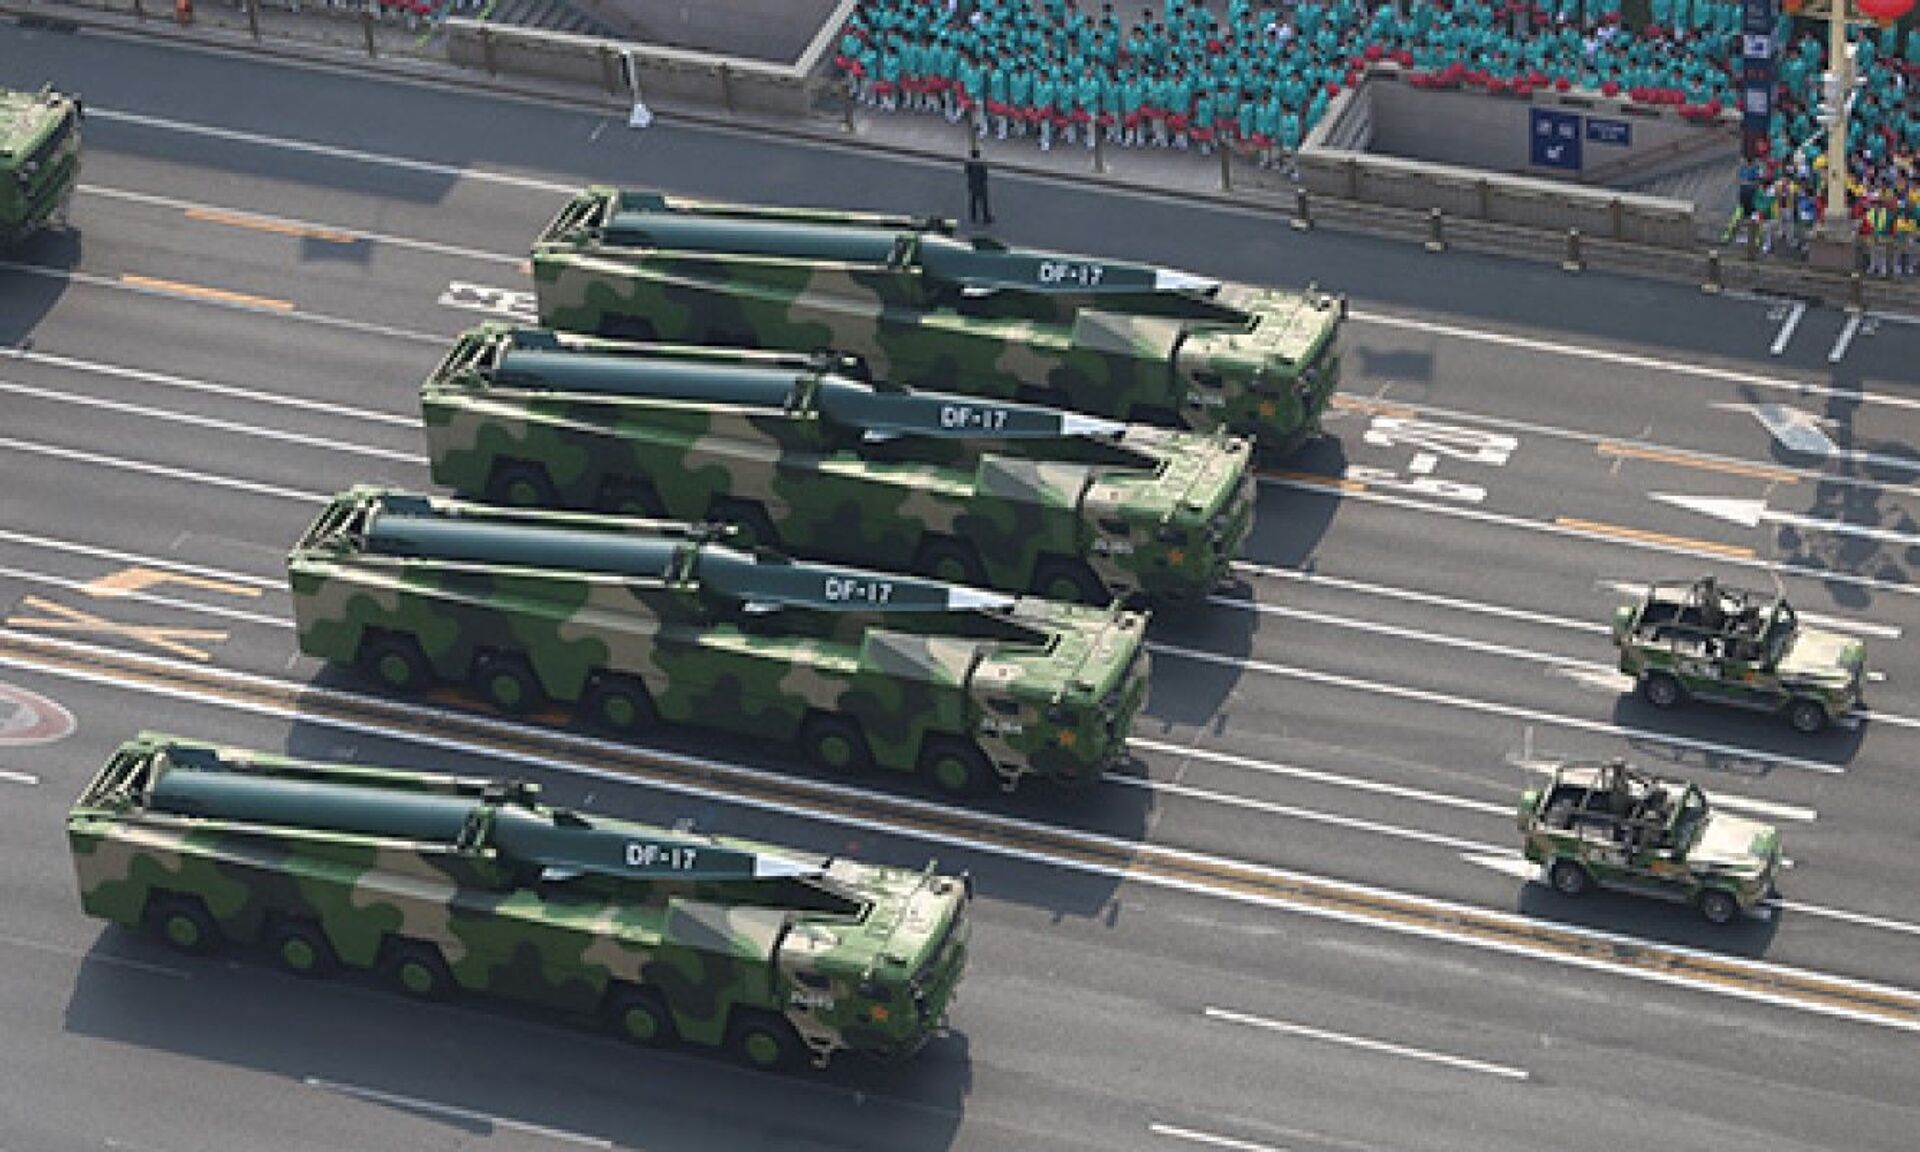 Making their debut in the general public for the first time, DF-17 hypersonic missiles join China's National Day parade held in Beijing on October 1, 2019 - Sputnik International, 1920, 07.11.2022